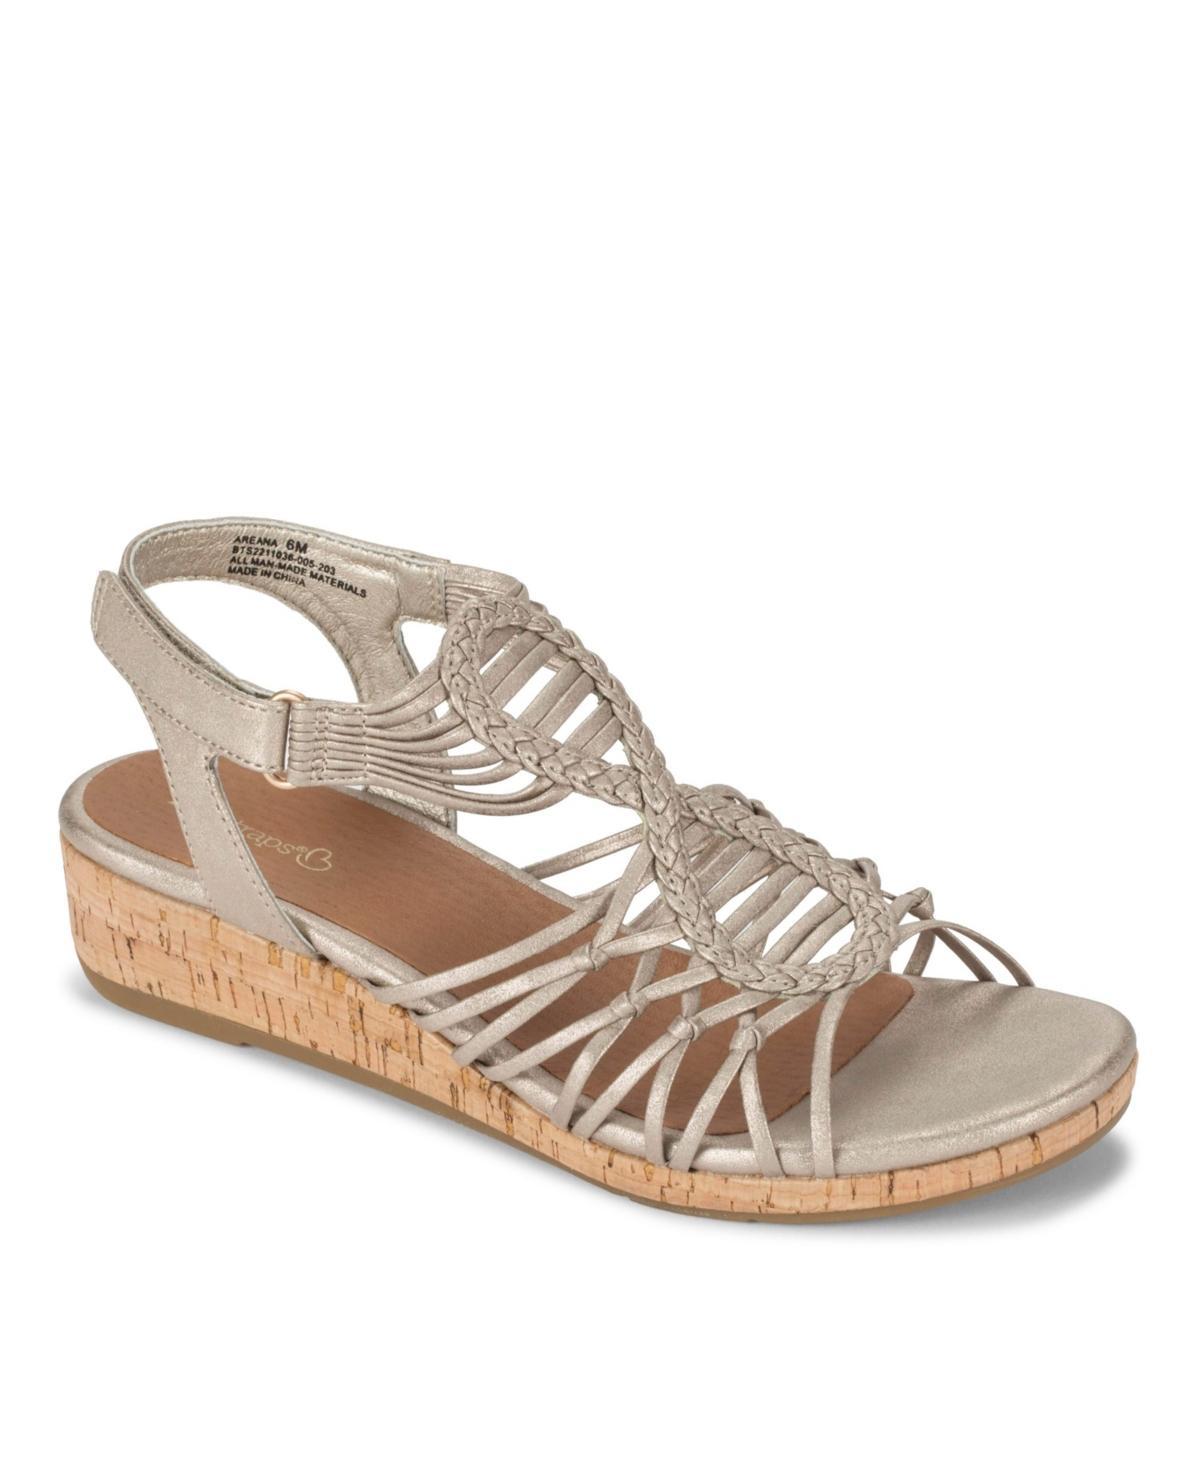 Baretraps Areana Womens Wedge Sandals Lt Brown Product Image